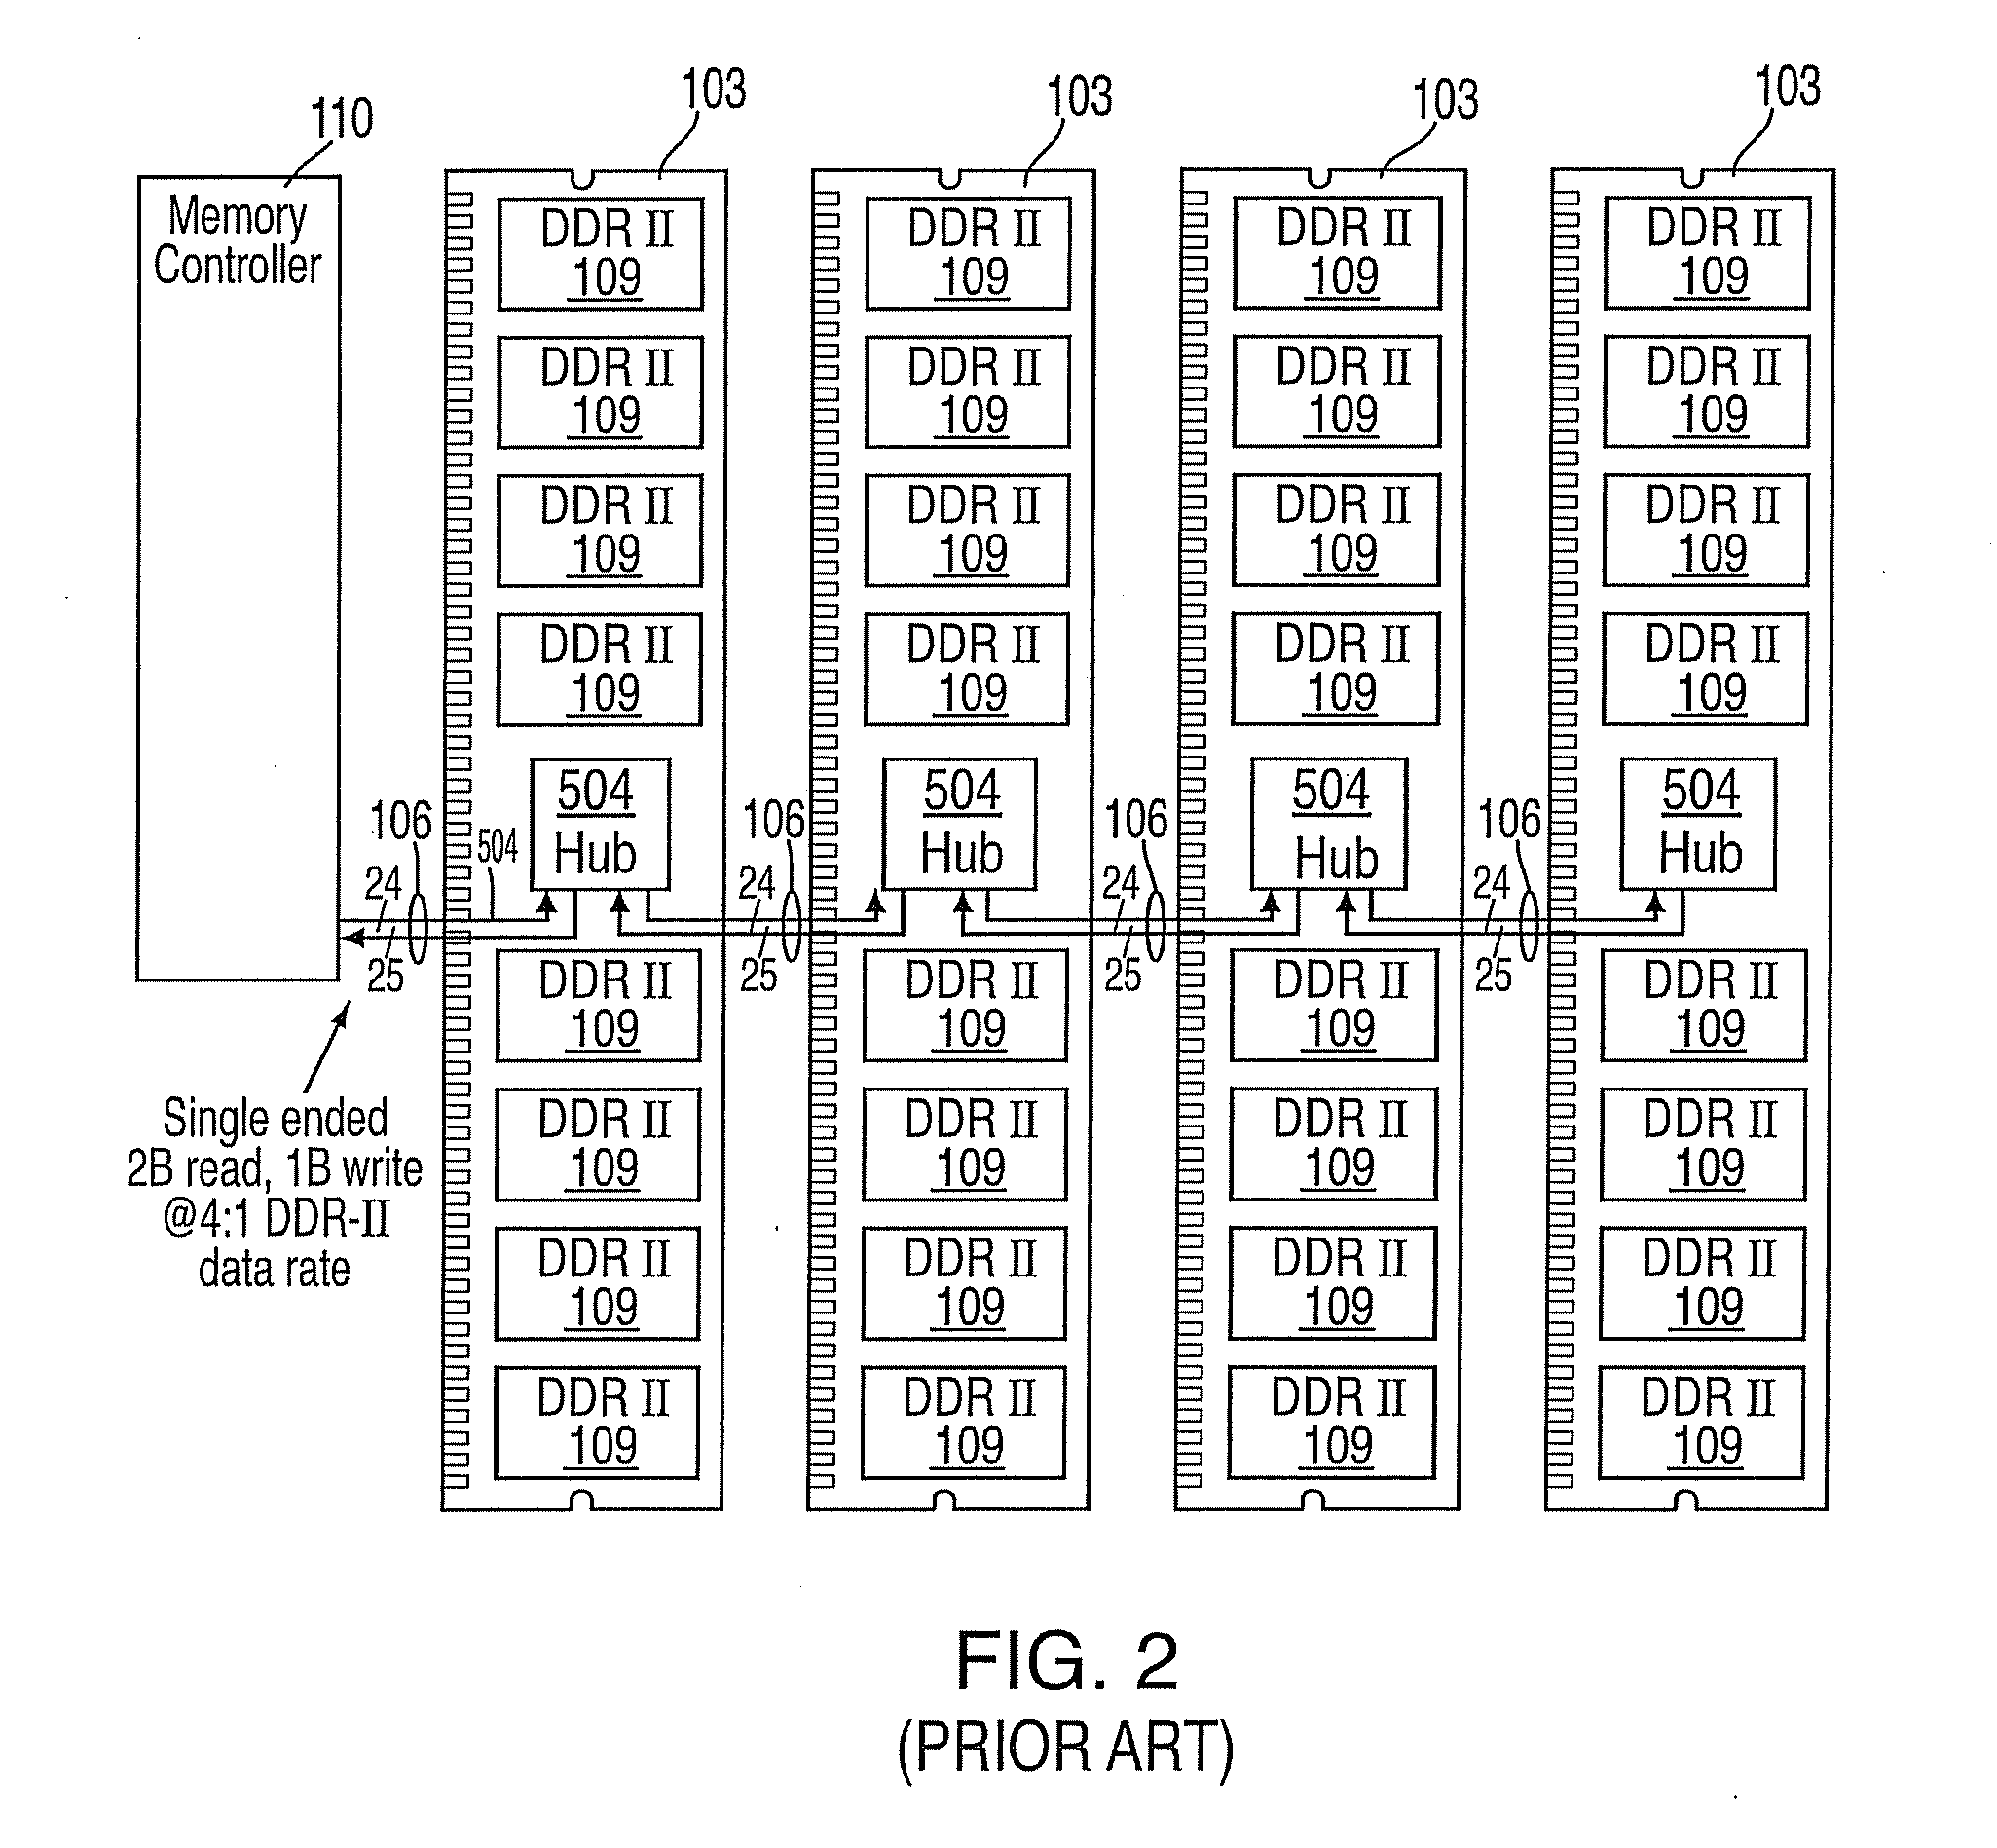 System and method for providing a high fault tolerant memory system